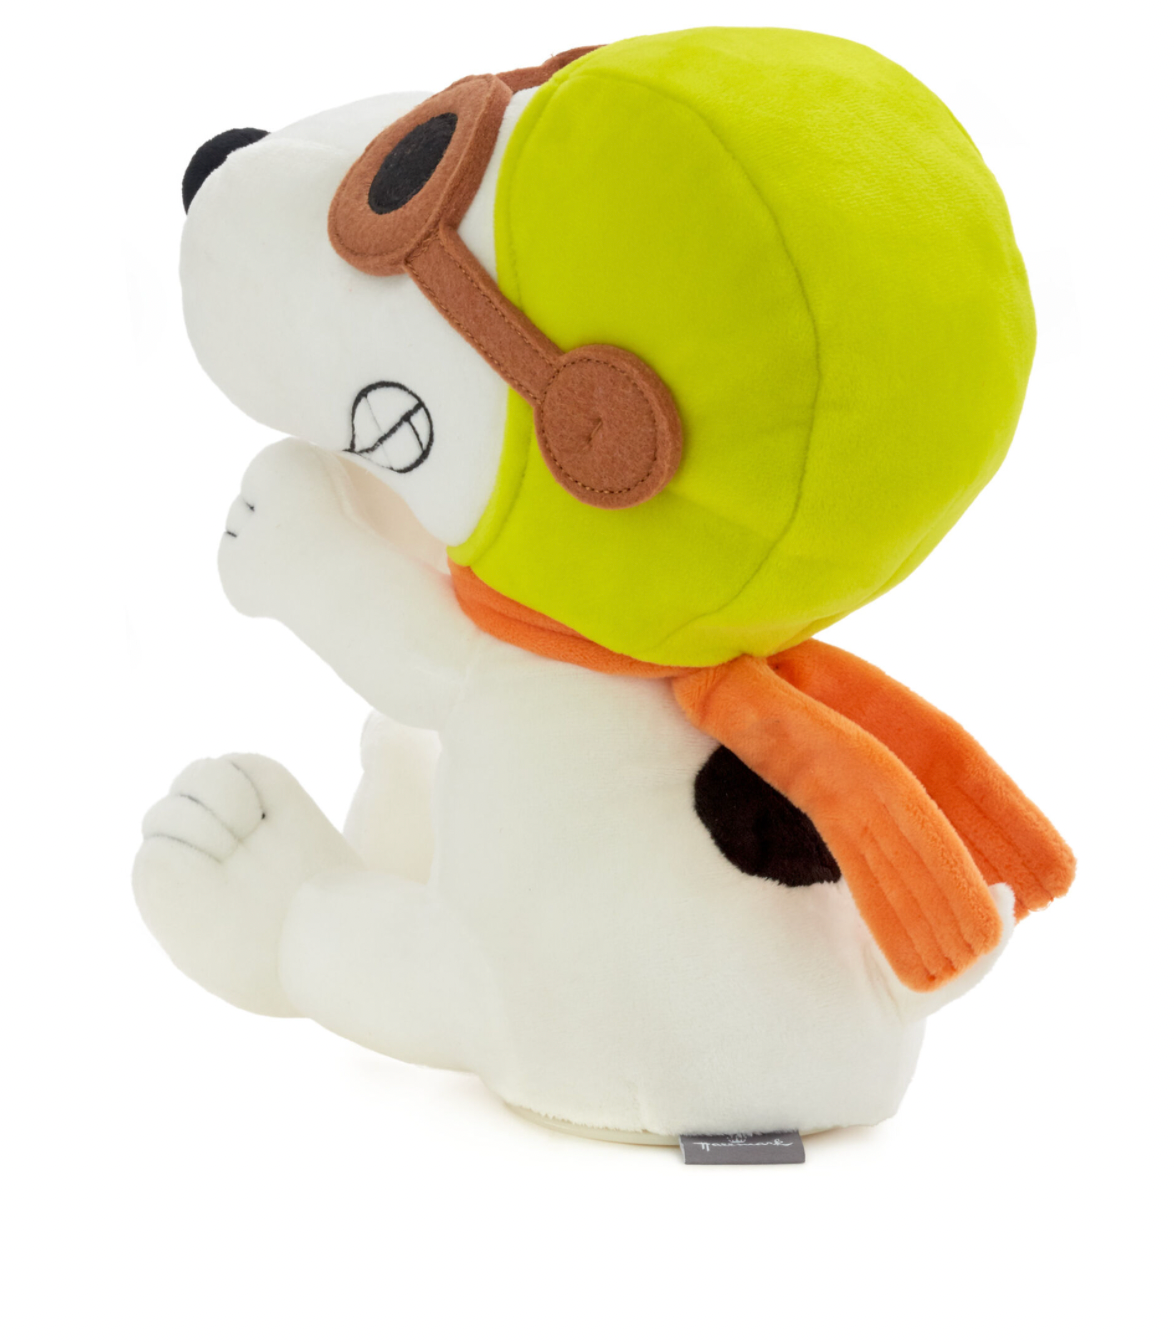 Hallmark Halloween Peanuts Snoopy Flying Ace Plush With Sound New with Tag